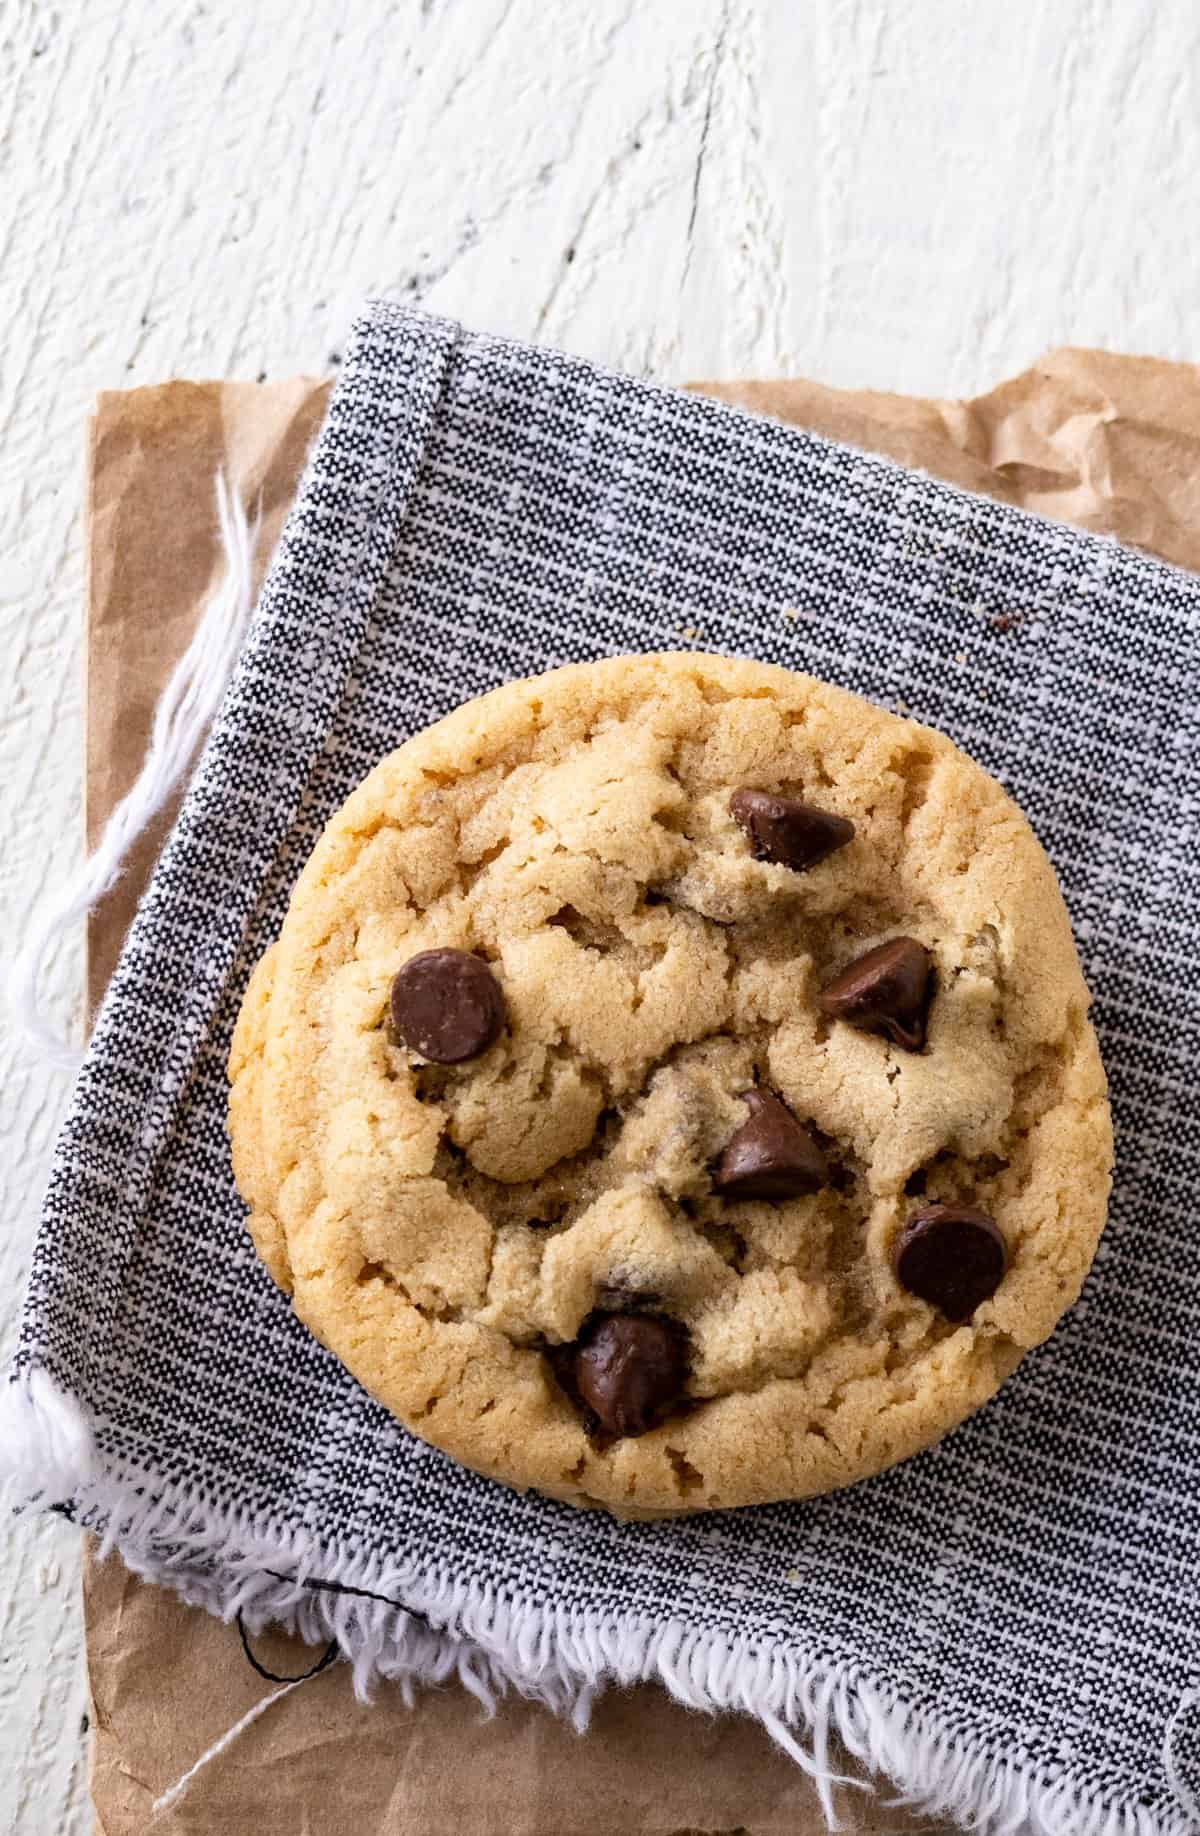 Chocolate chip peanut butter cookie on a blue napkin.